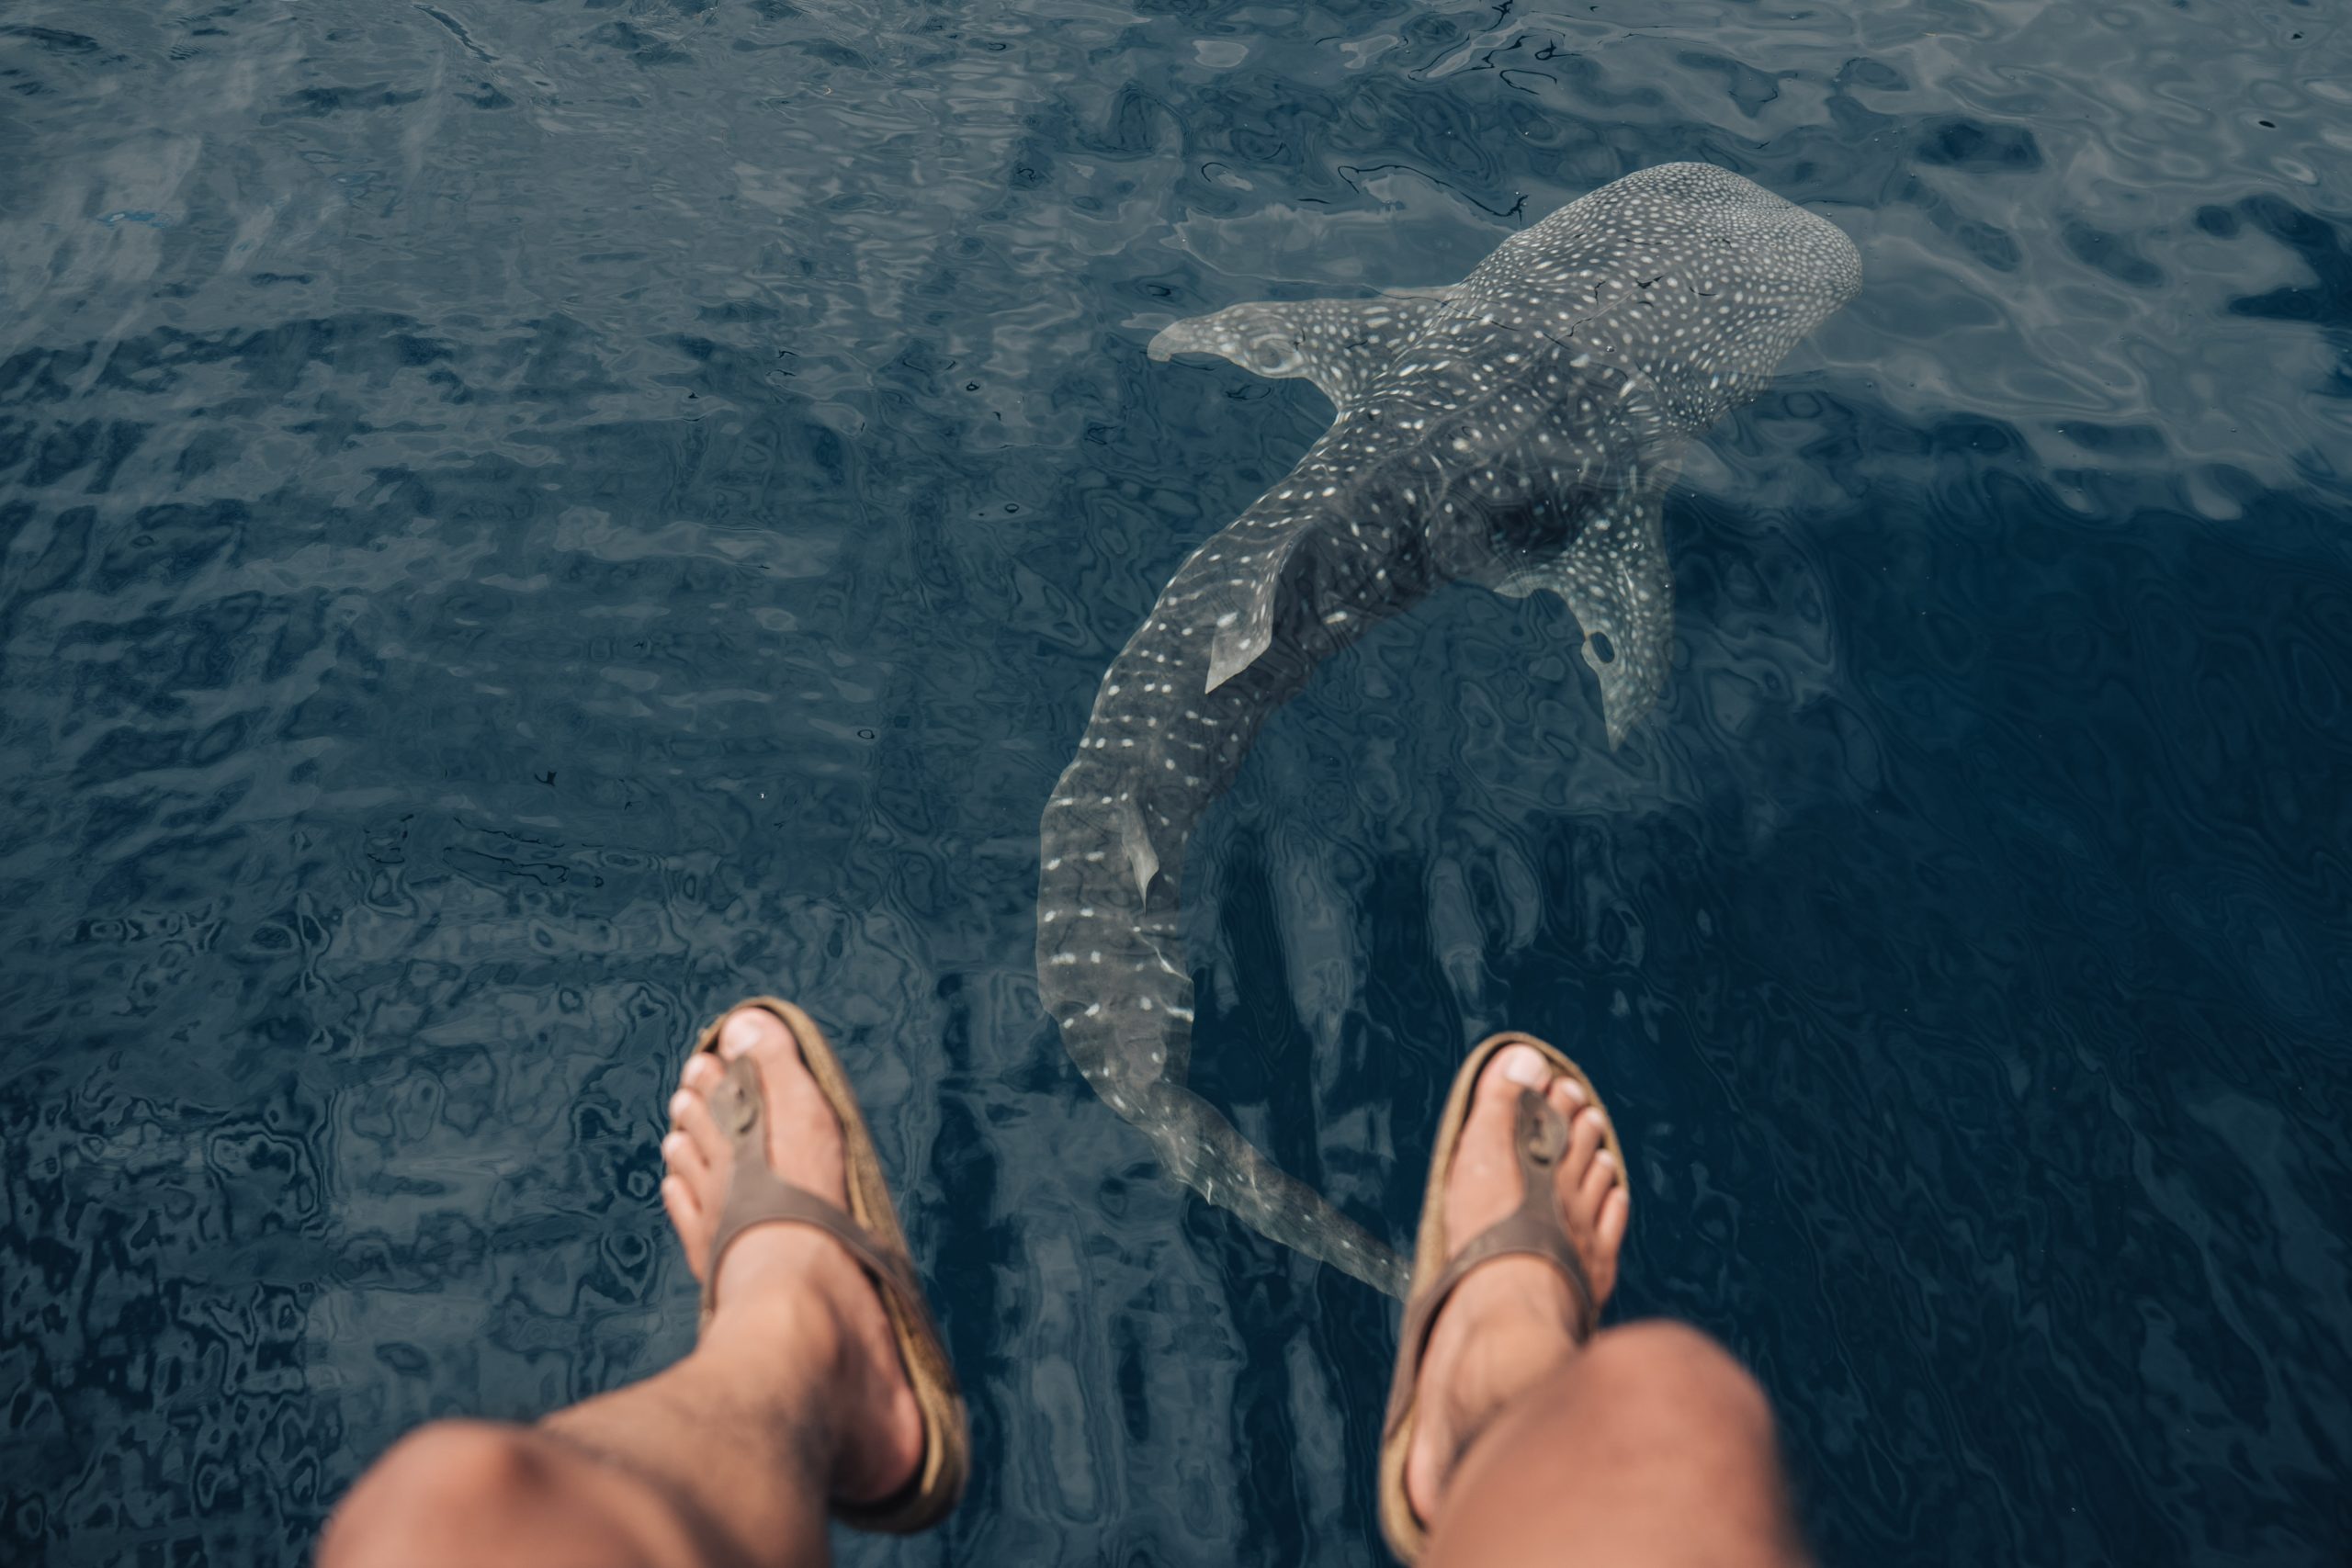 Stunning footage of the world's largest endangered whale shark migrations off the Qatari coast